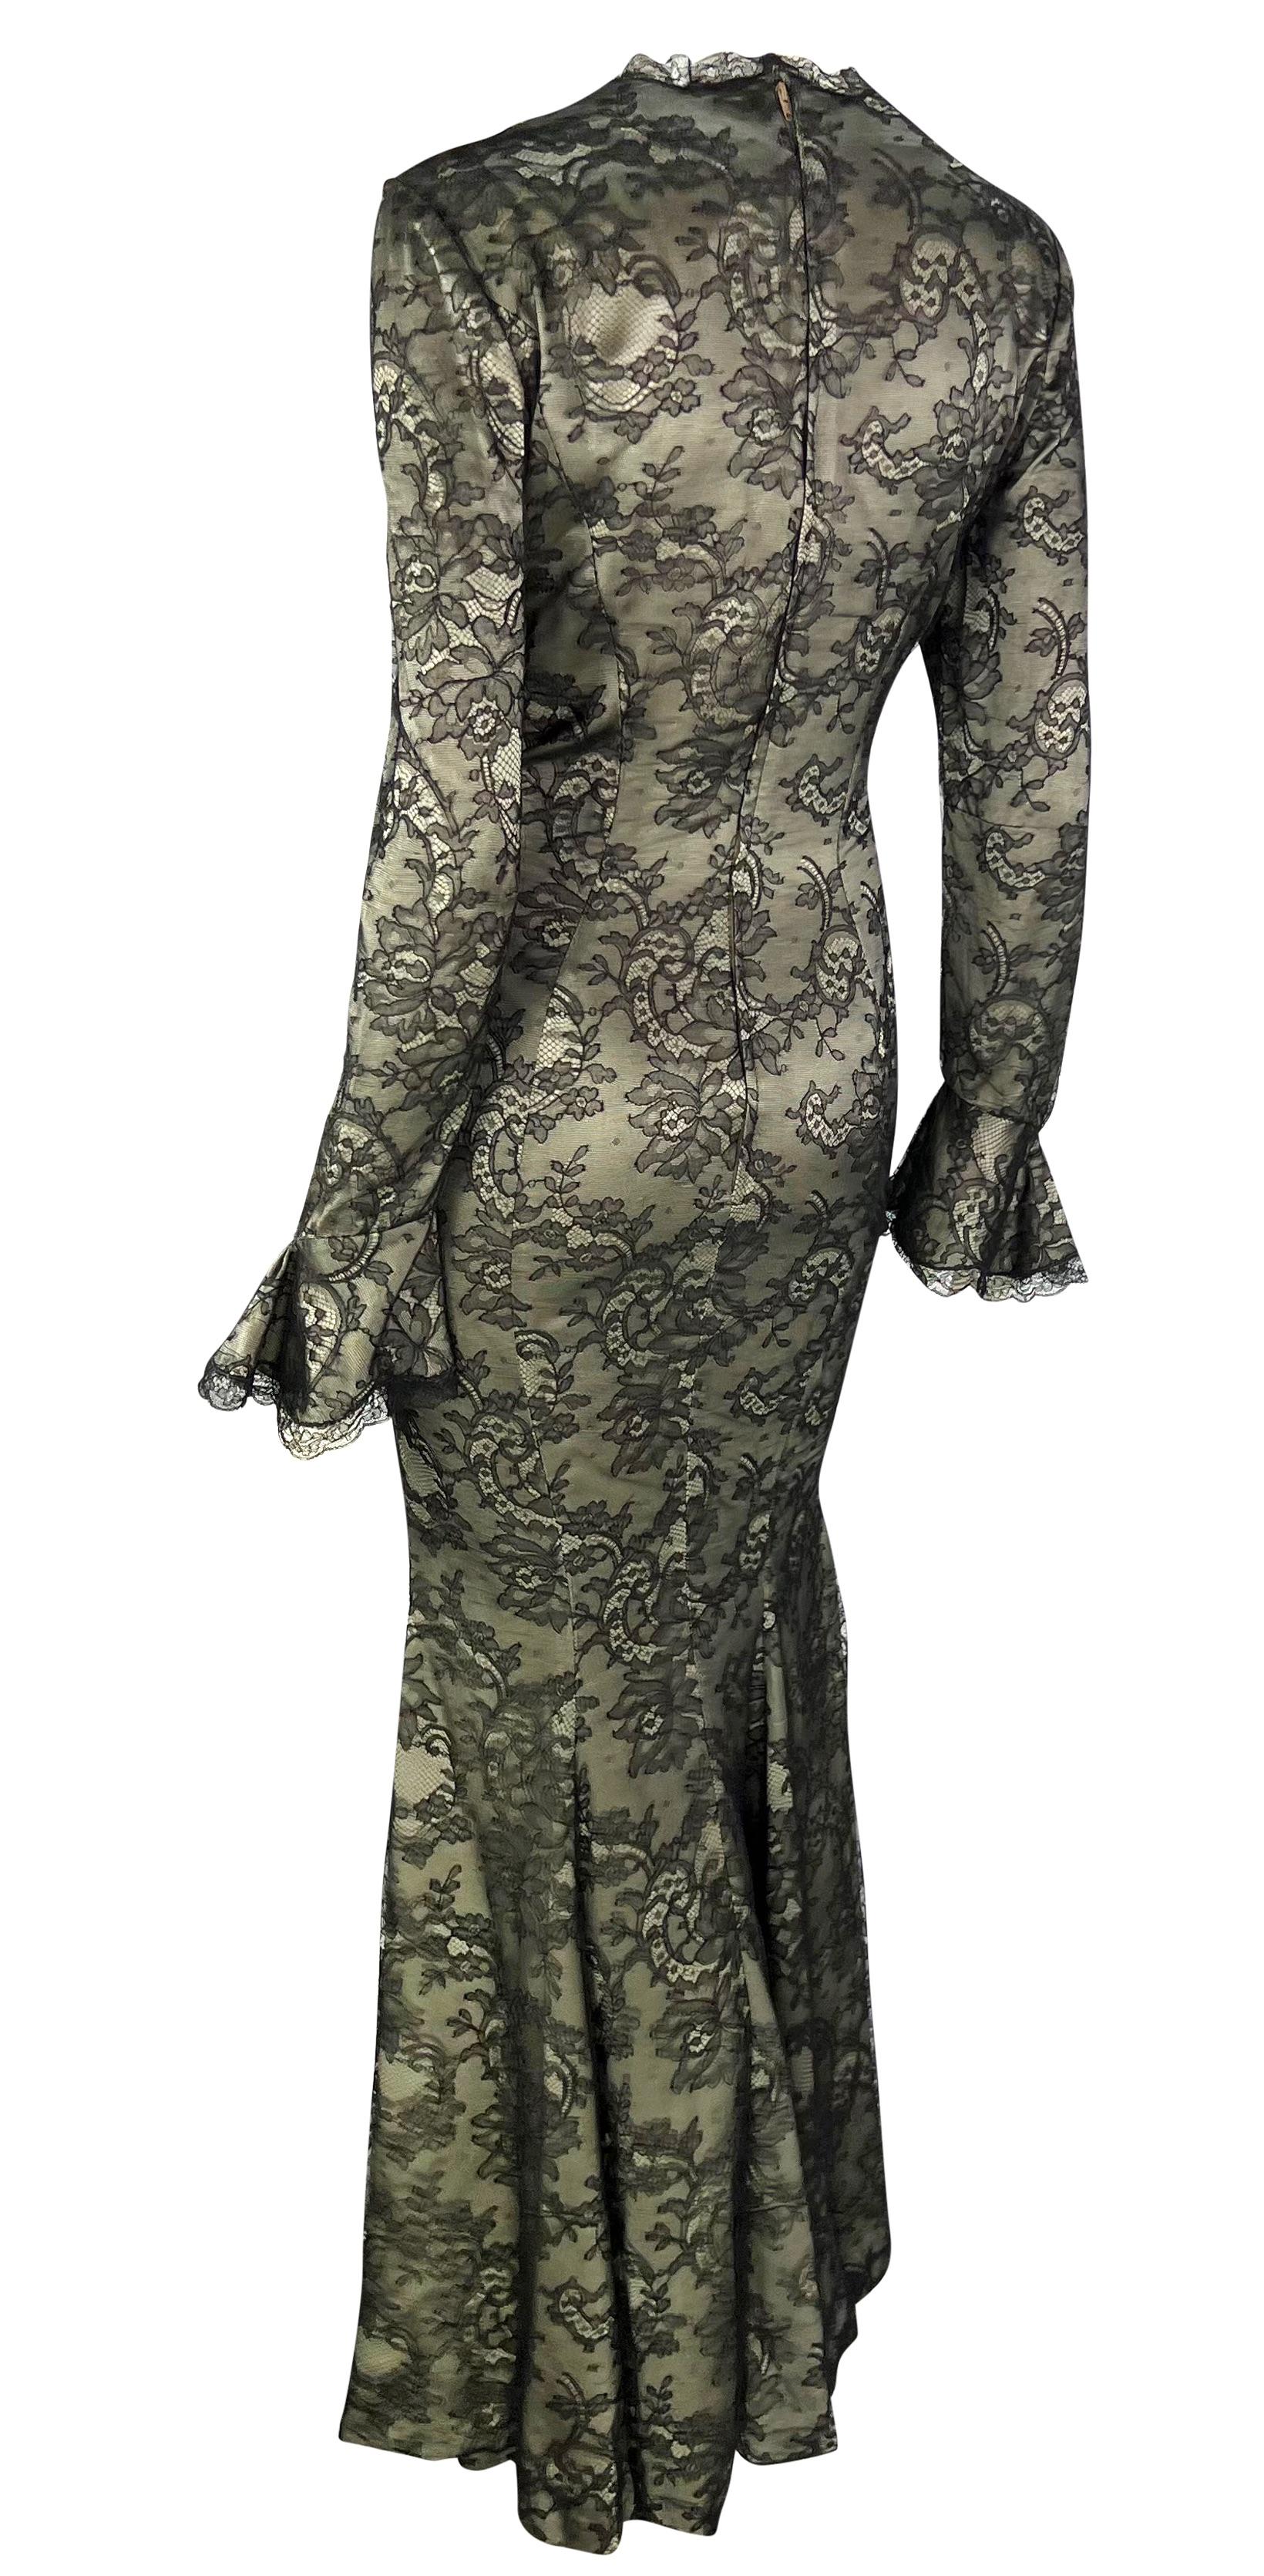 Women's S/S 1995 Thierry Mugler Plunging Taupe Satin Black Floral Lace Overlay Gown For Sale